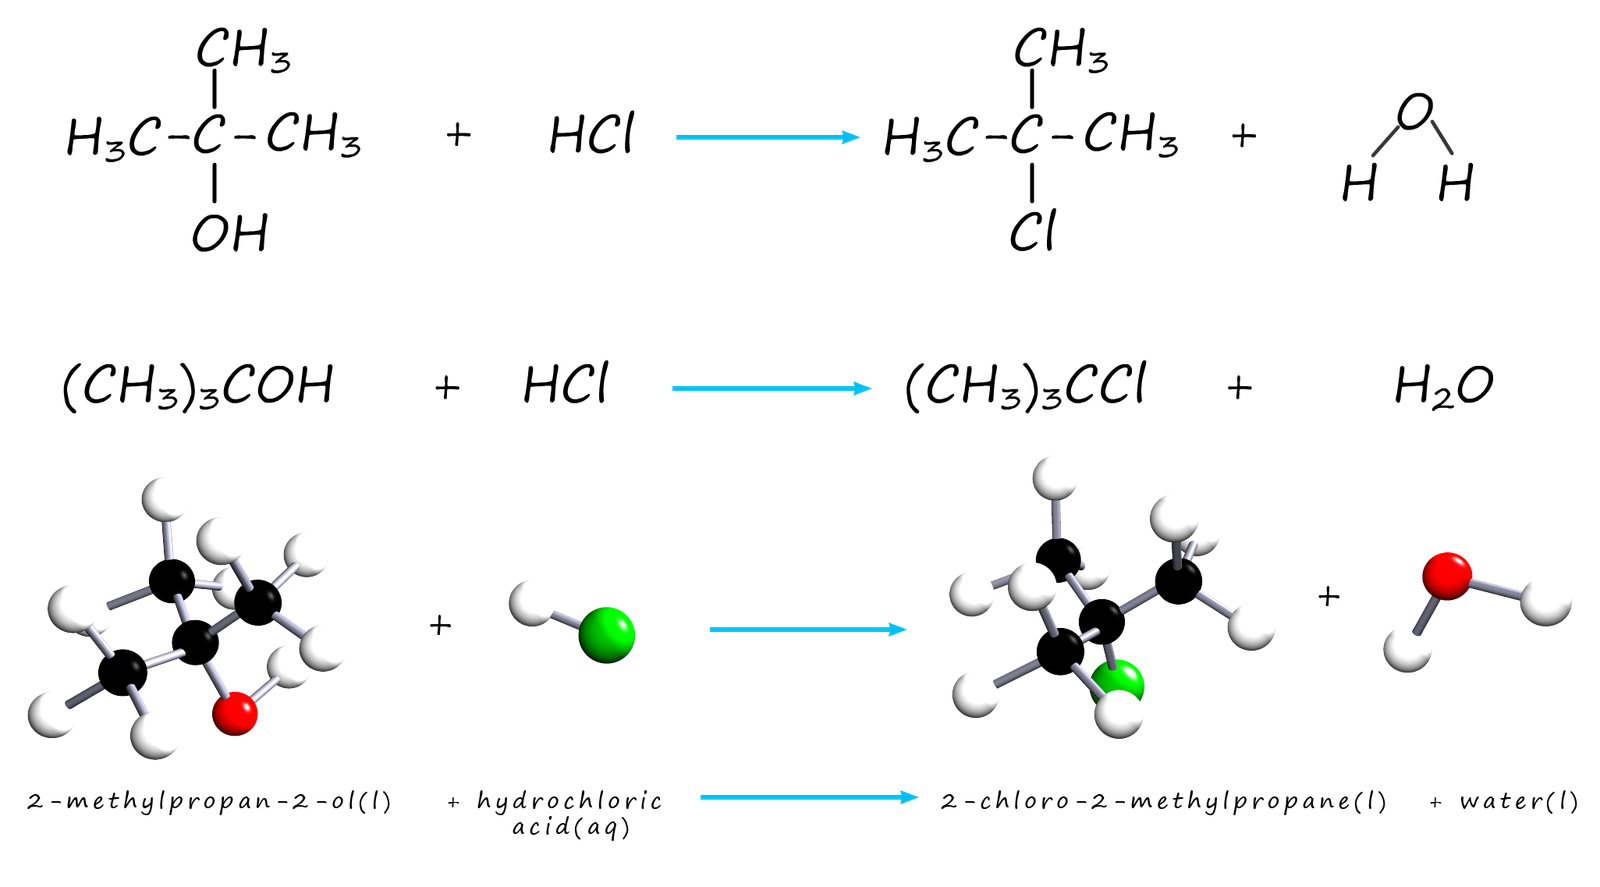 replacing the -OH group in an alcohol with a chlorine atom